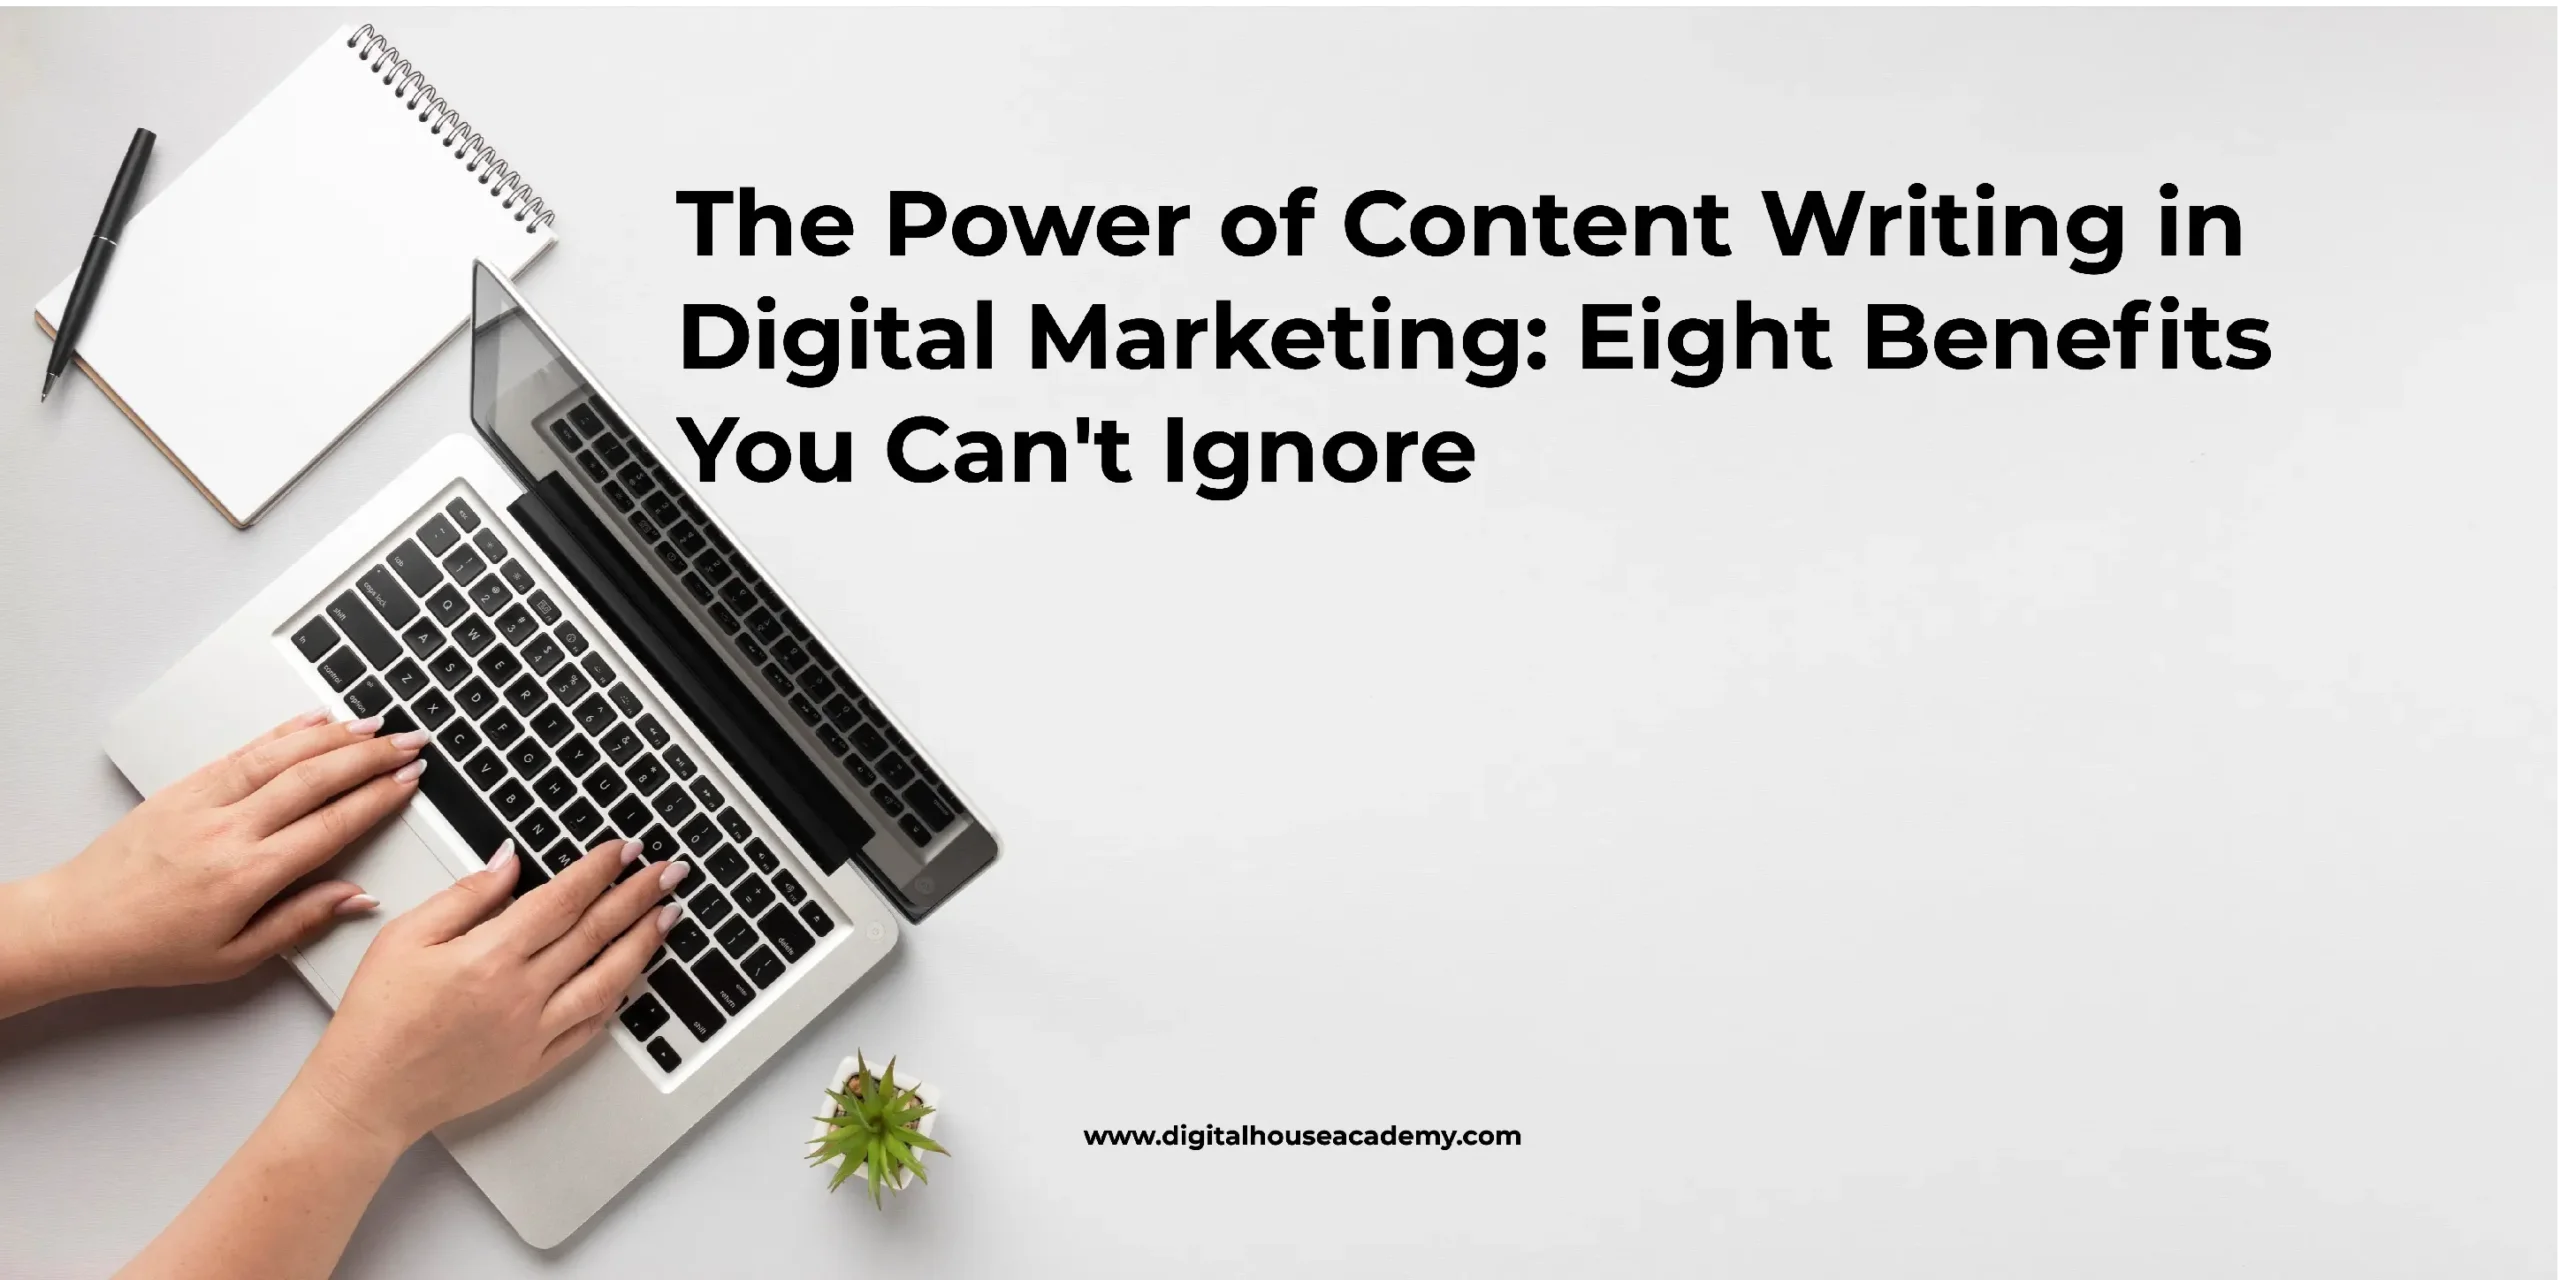 The Power of Content Writing in Digital Marketing: Eight Benefits You Can’t Ignore